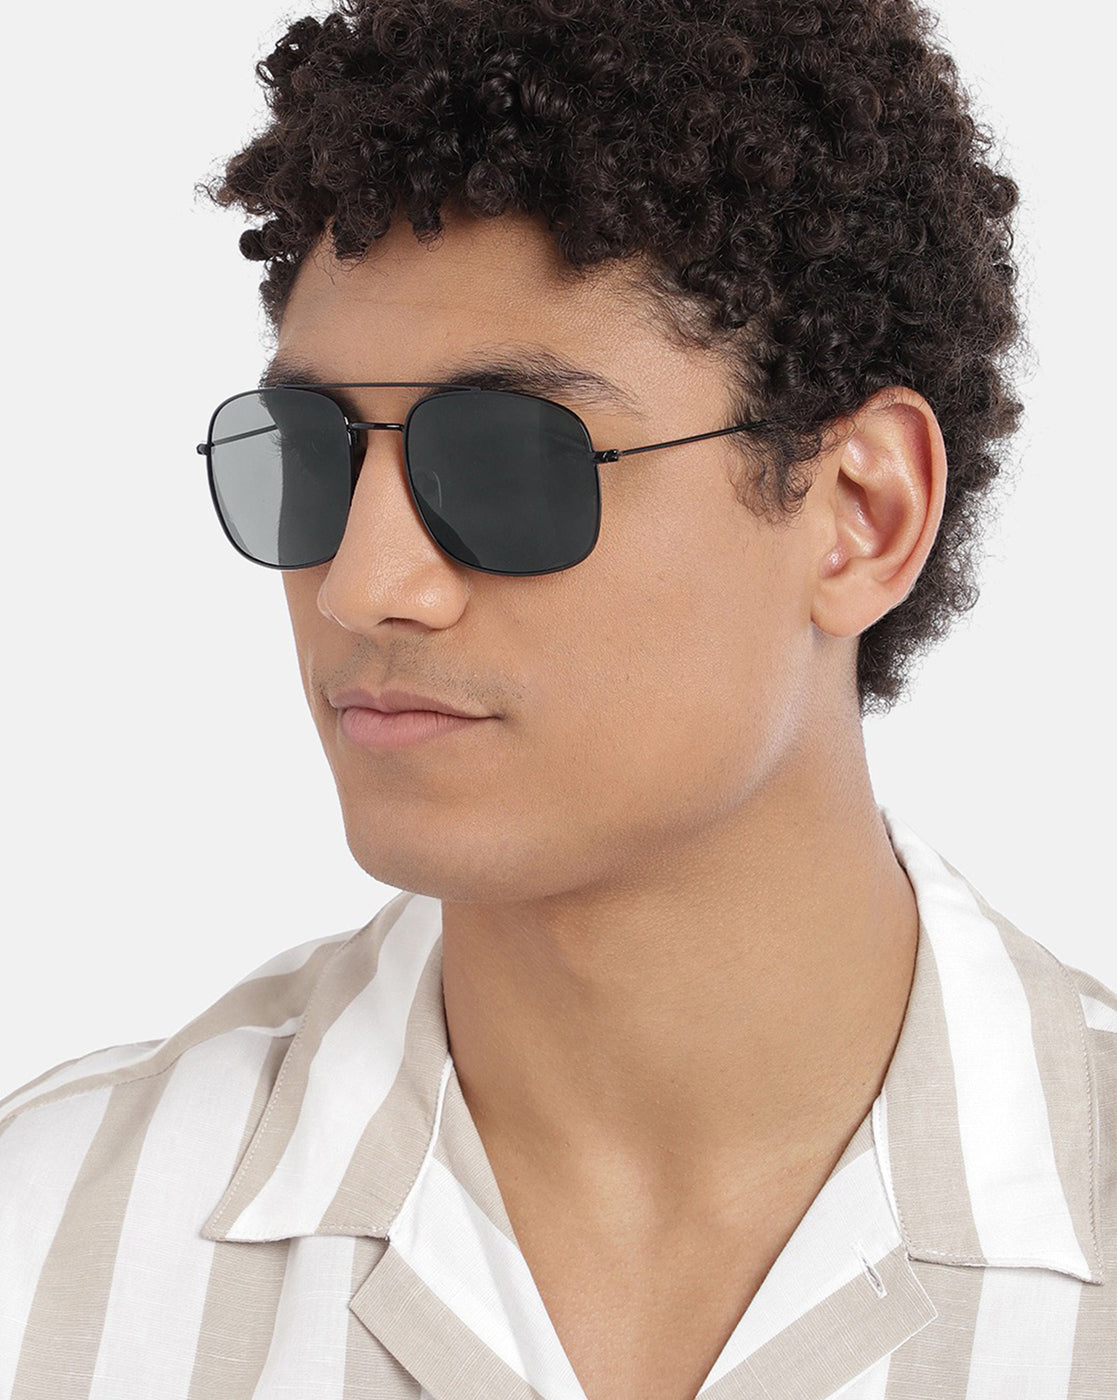 Carlton London Square Sunglasses With Uv Protected Lens For Men